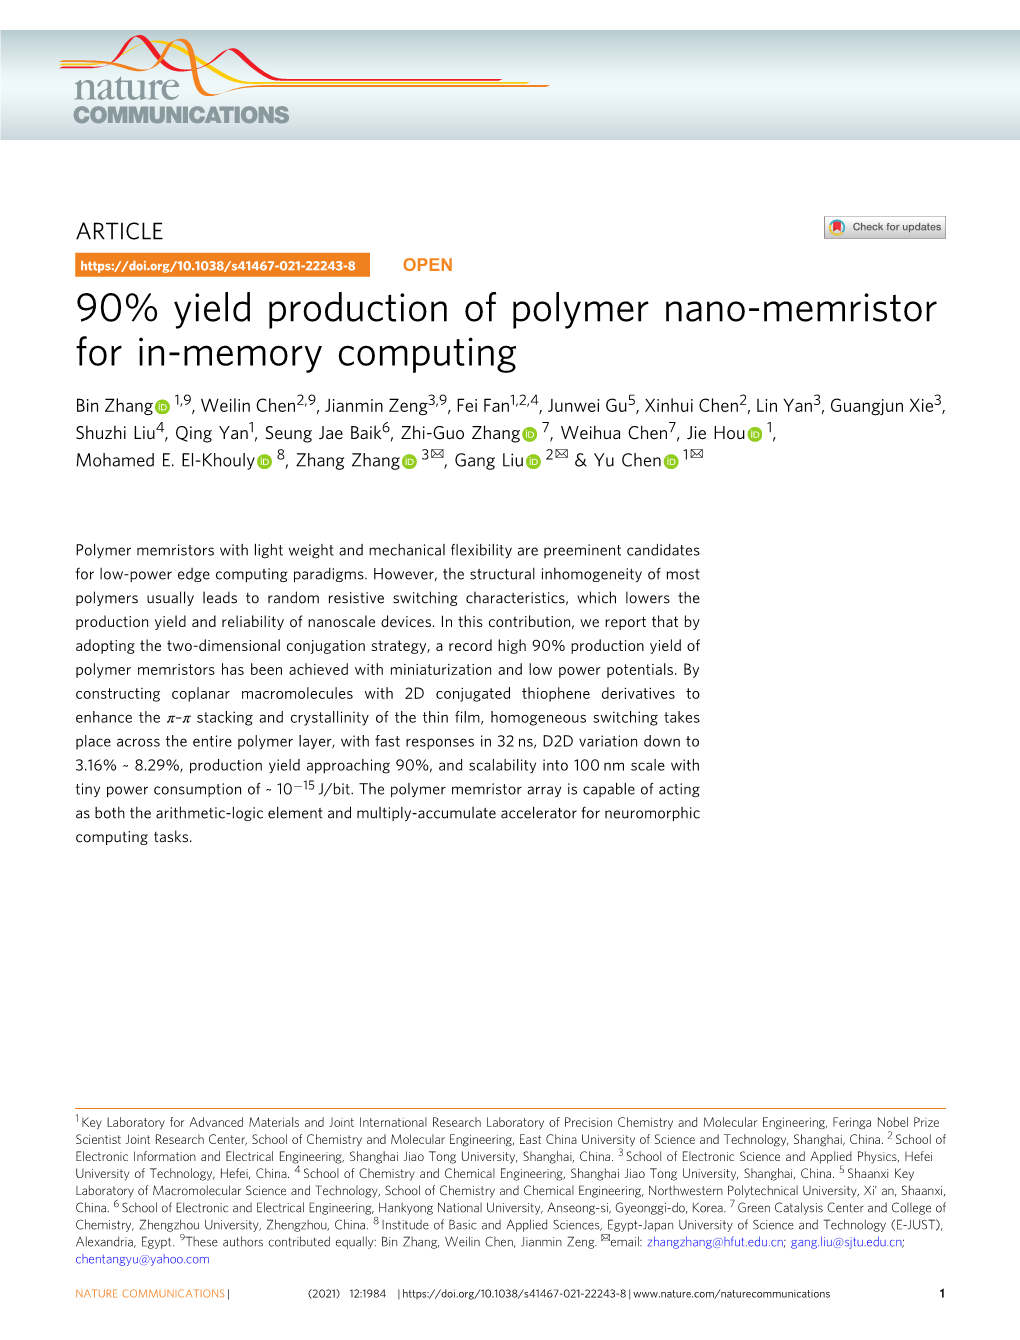 90% Yield Production of Polymer Nano-Memristor for In-Memory Computing